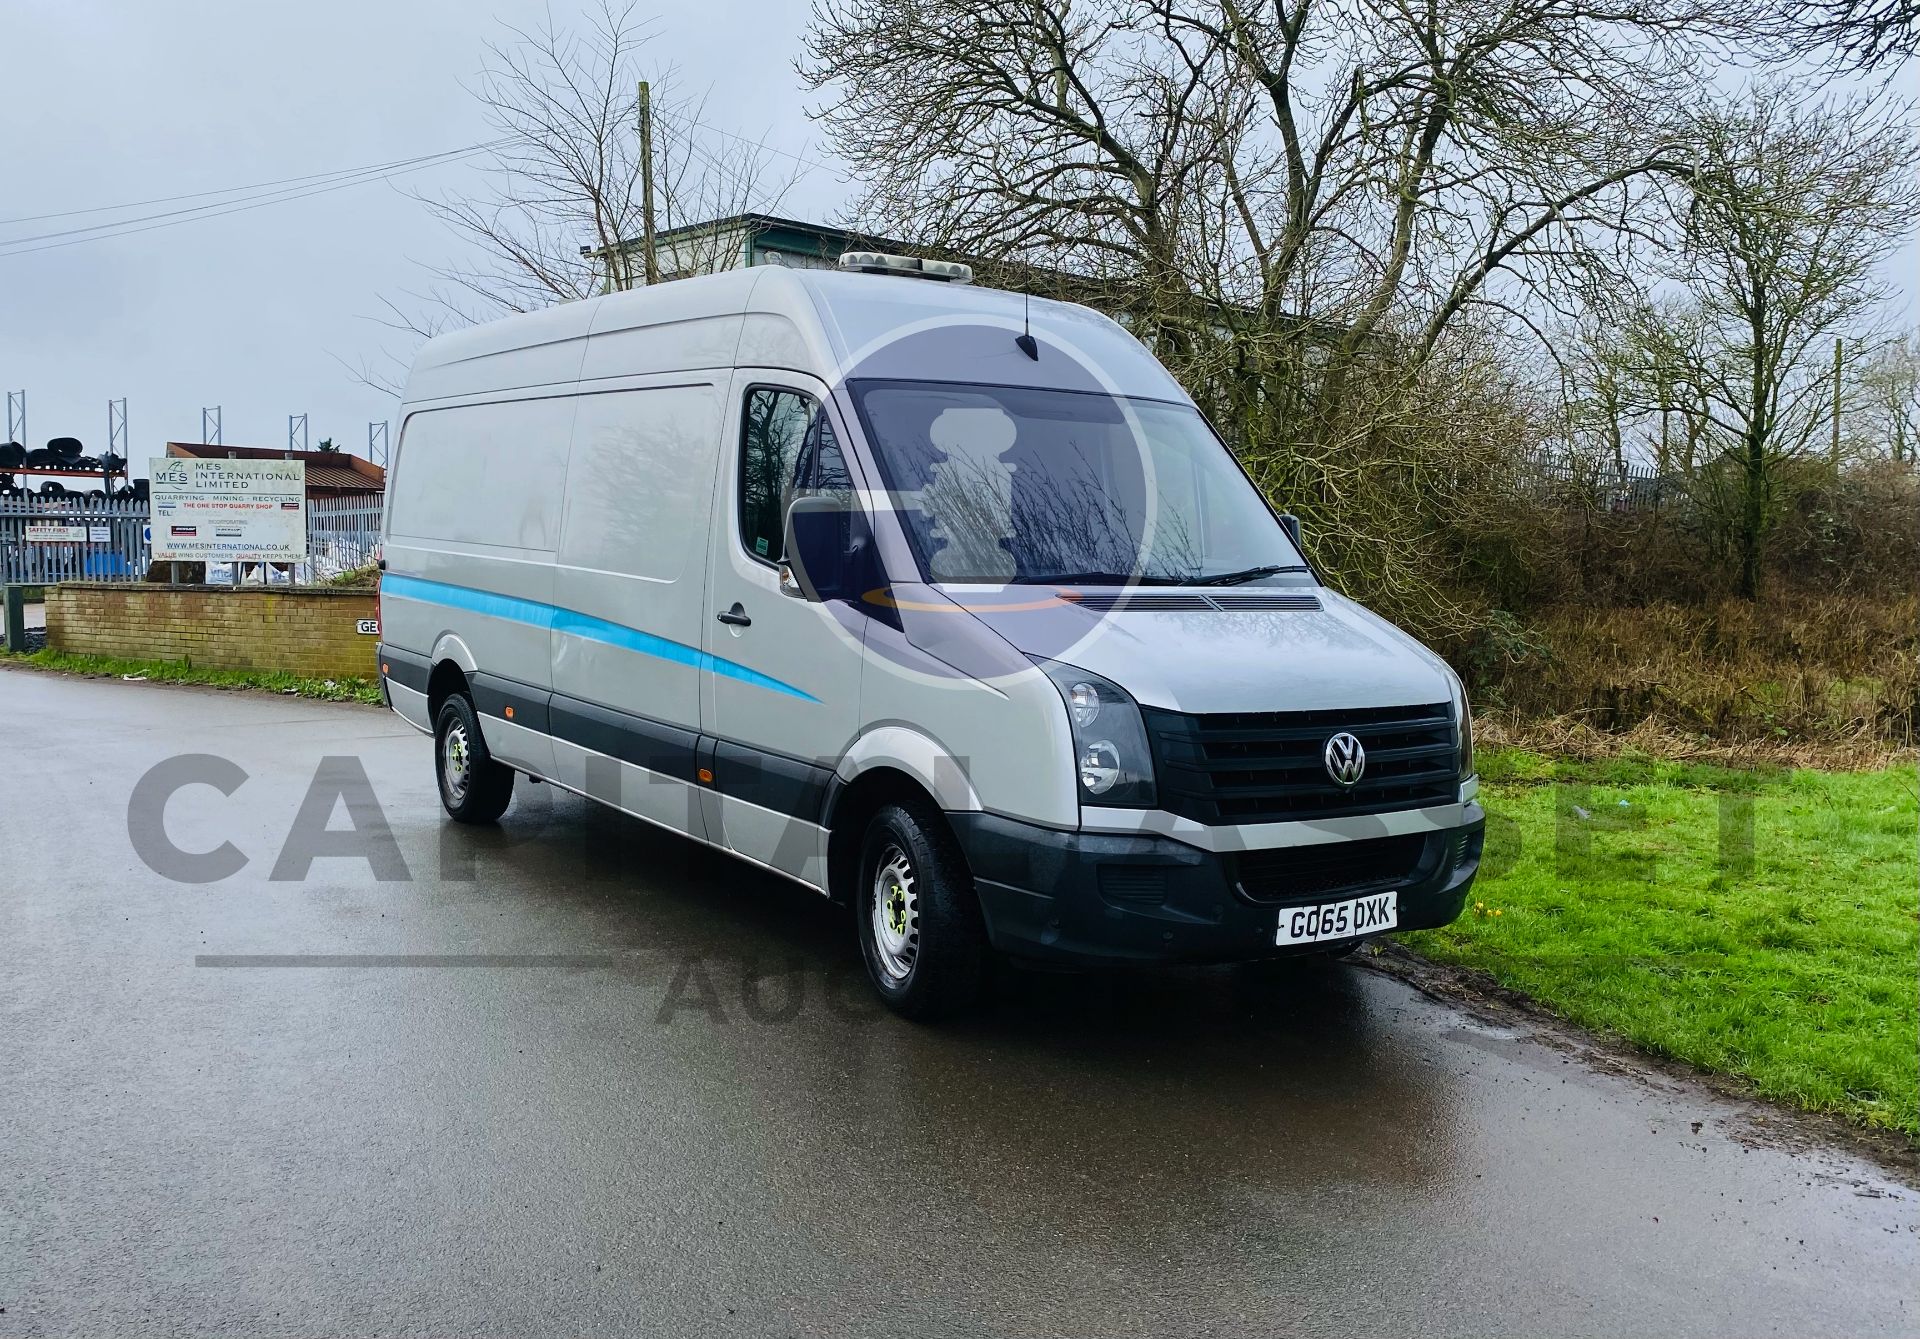 (ON SALE / RESERVE MET) VOLKSWAGON CRAFTER 2.0 TDI LONG WHEEL BASE AIR CONDITIONING-LONG WHEEL BASE - Image 2 of 16